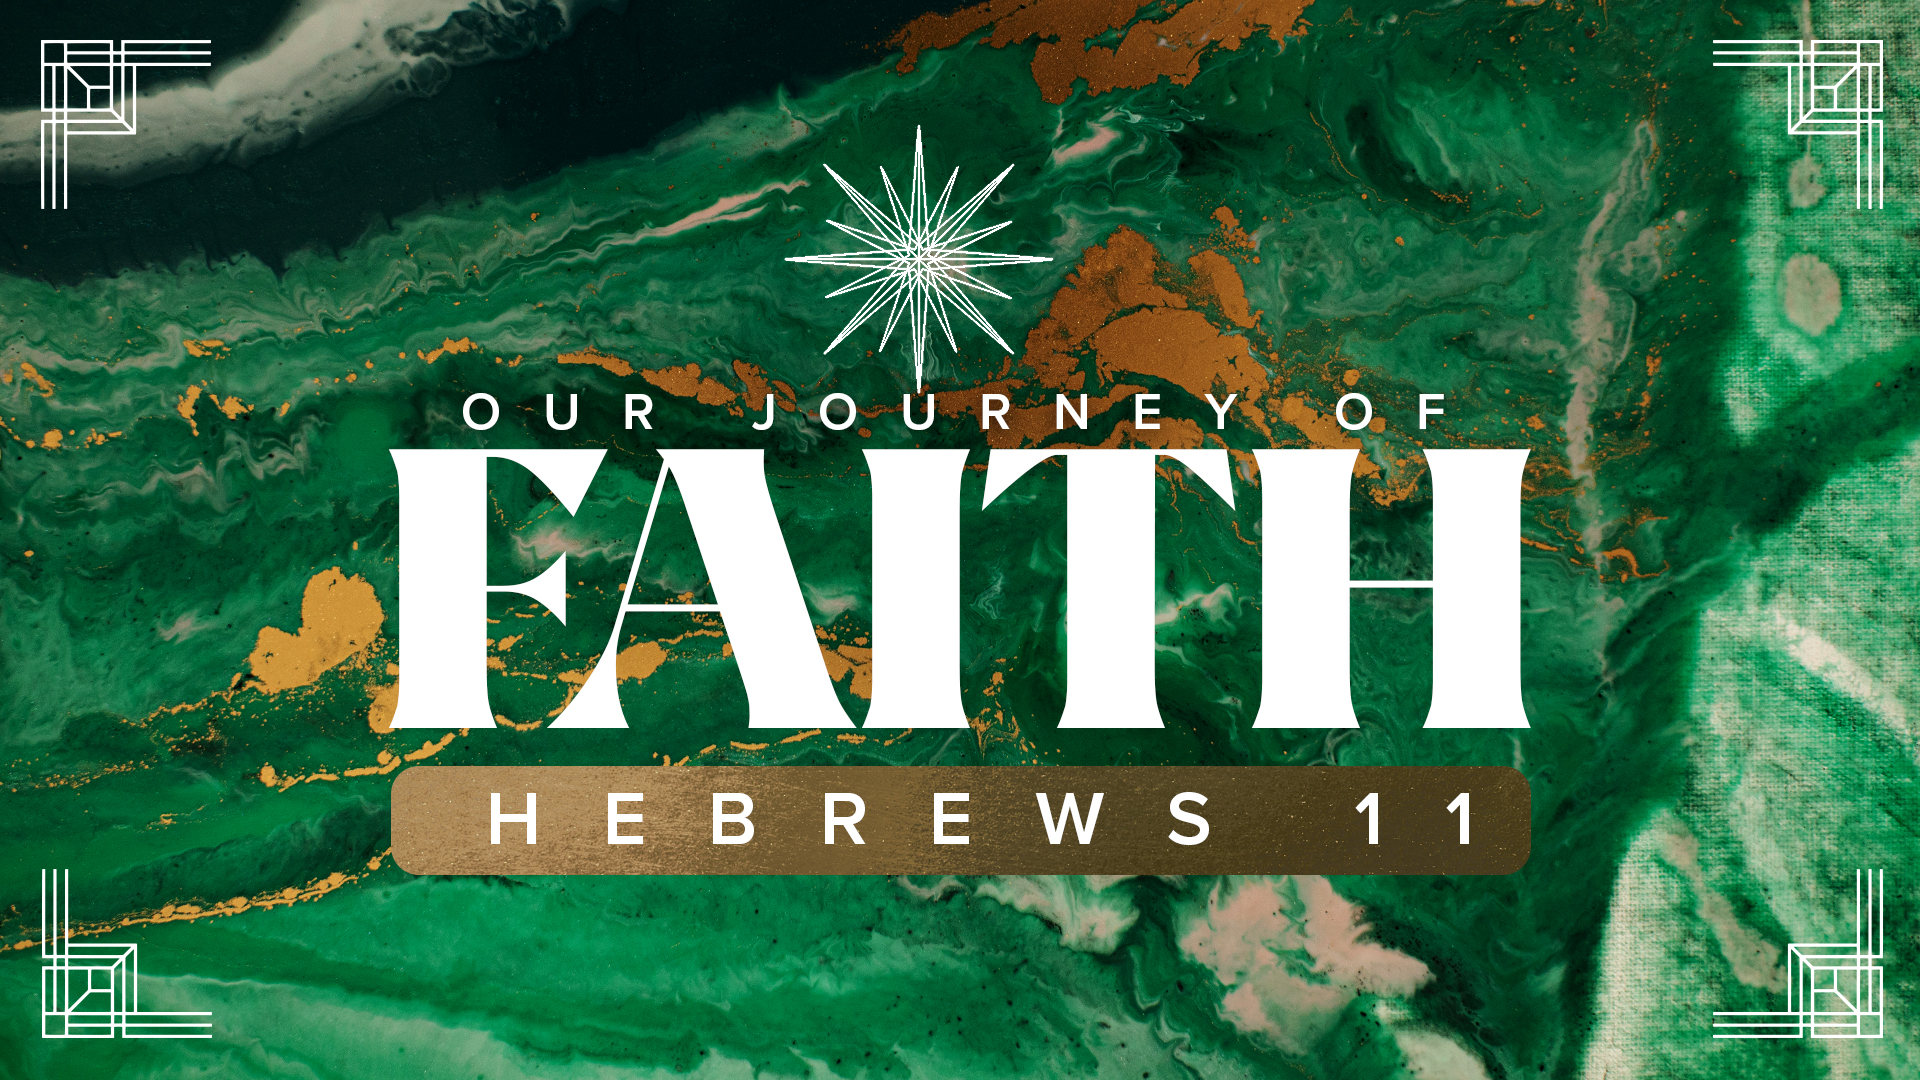 Hebrews 11:23-29: Moses and Faith in the Face of Risk (Hebrews 11: Our Journey of Faith)